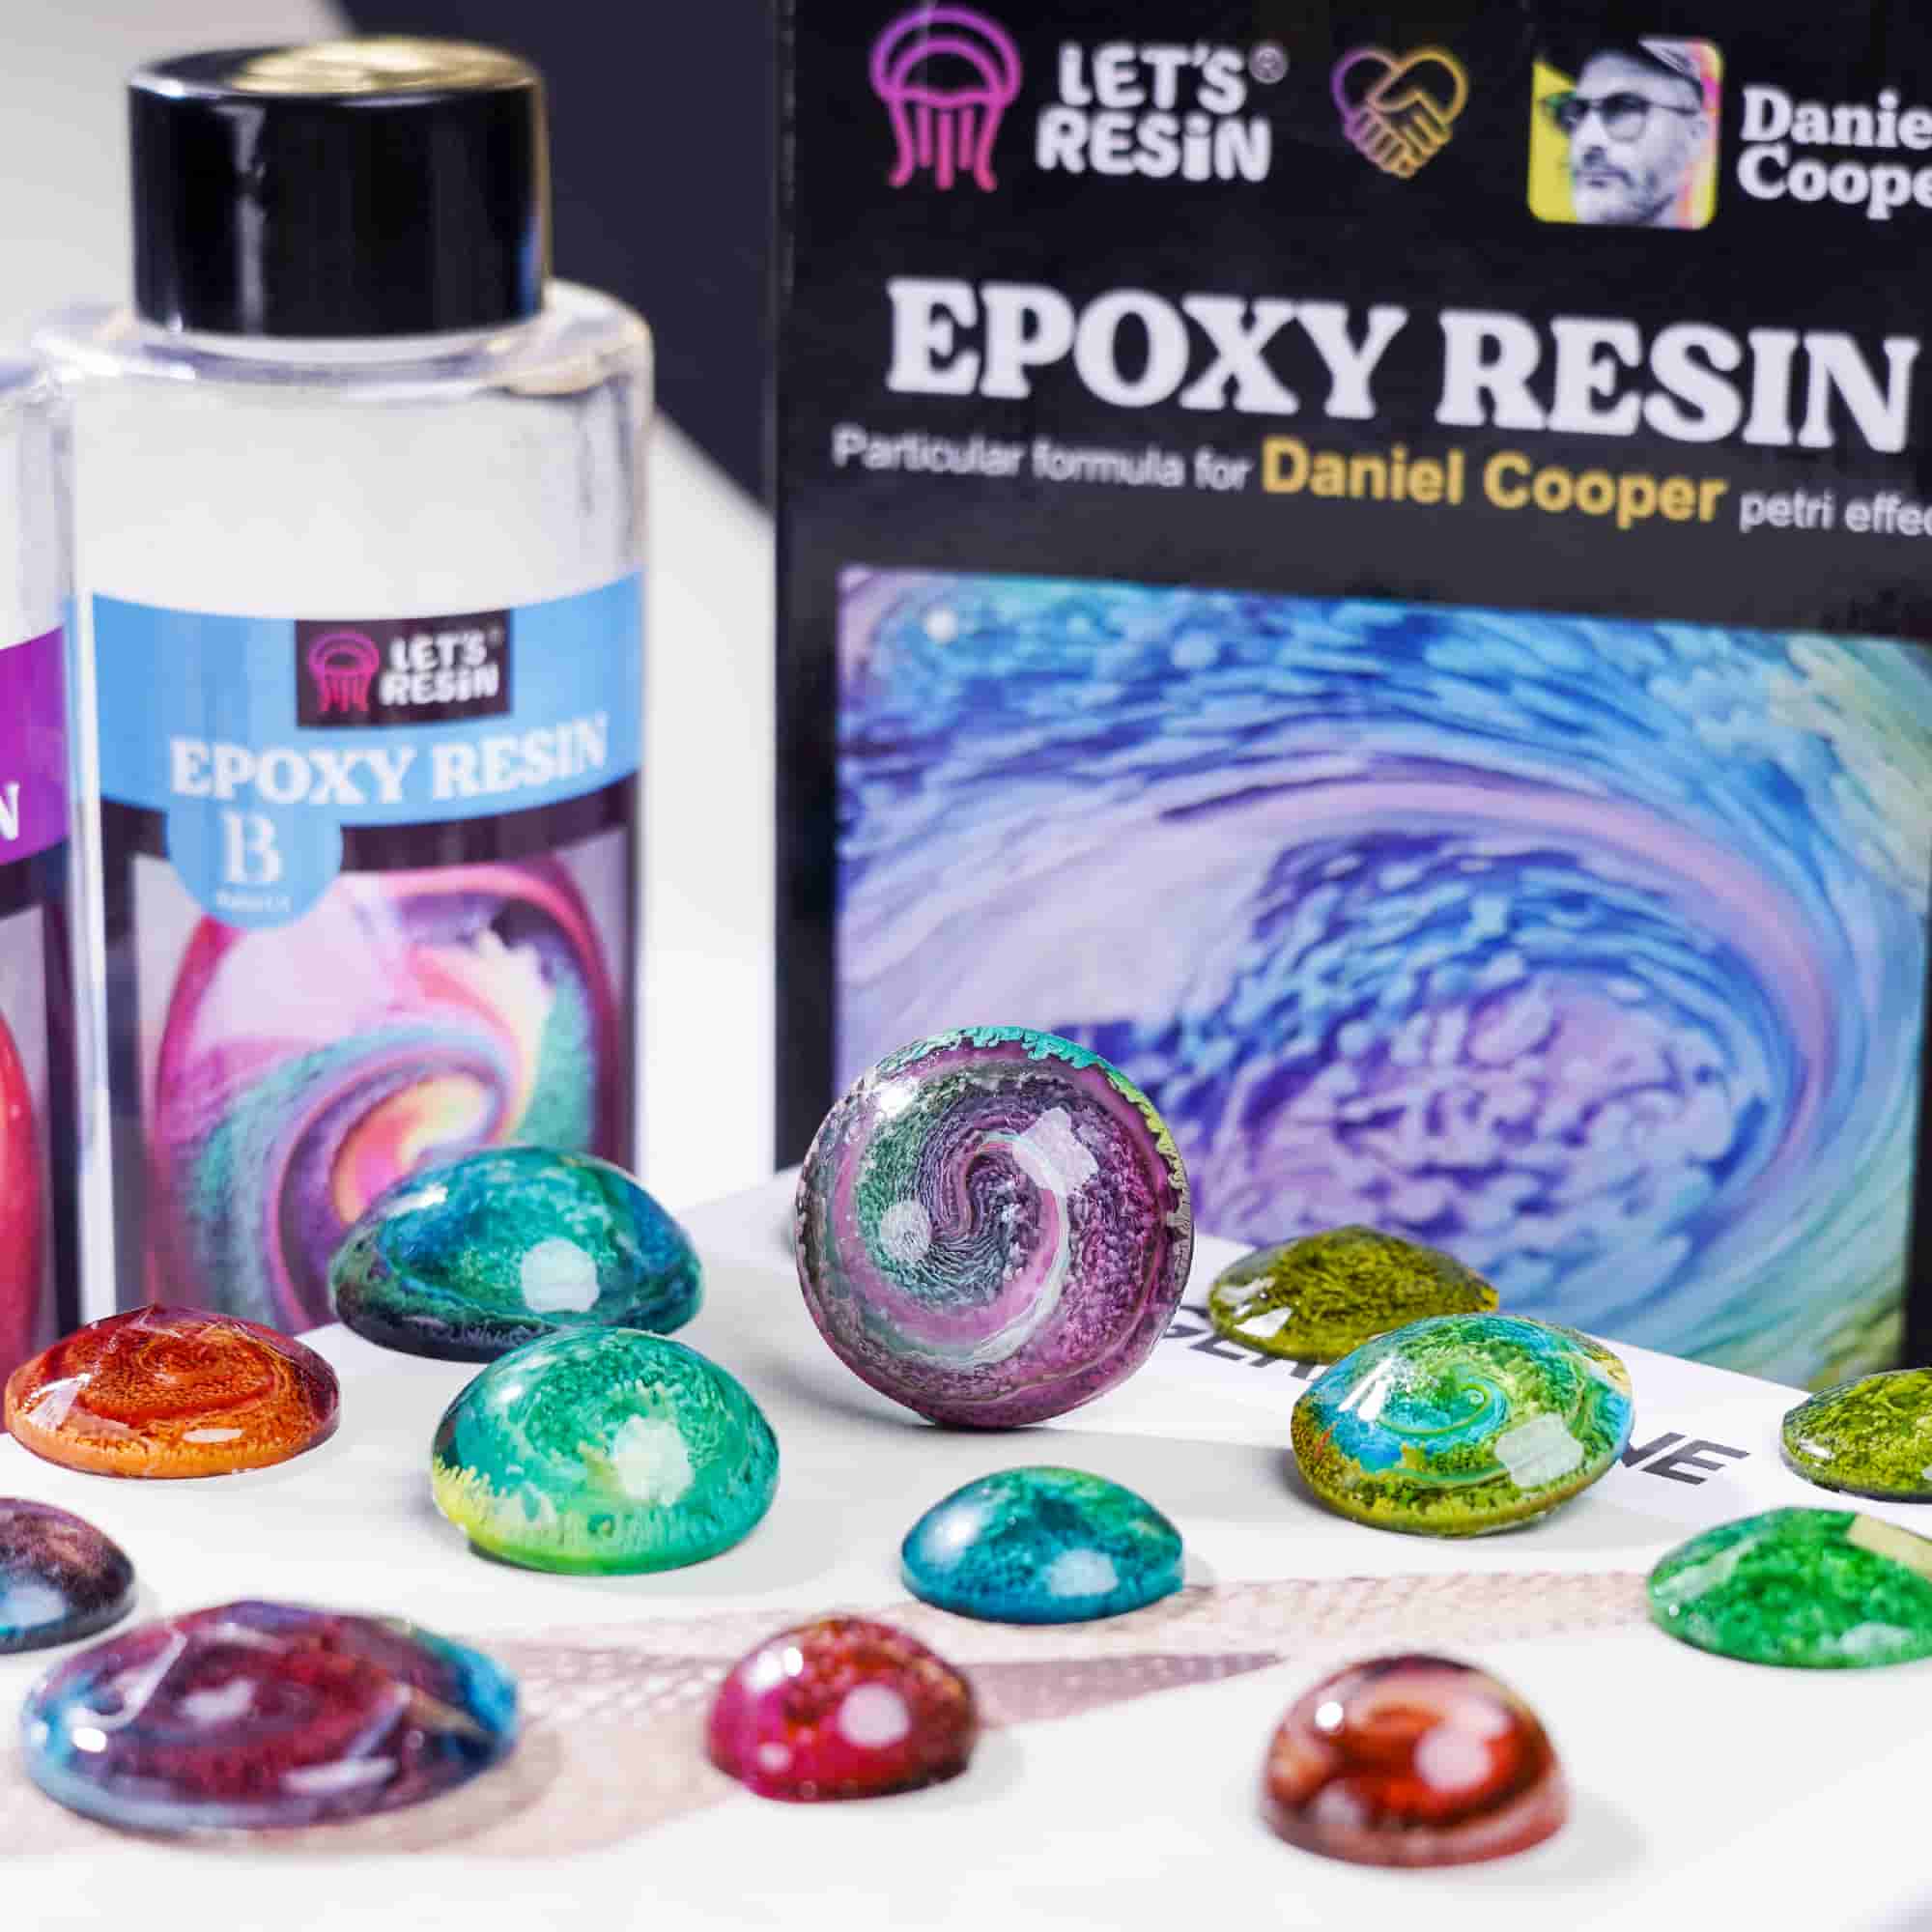 Let's Resin 23oz Epoxy Resin Kit - Let's Resin x Daniel Cooper, Crystal Clear Epoxy Resin for Jewelry, Art Resin, Tumblers, Casting